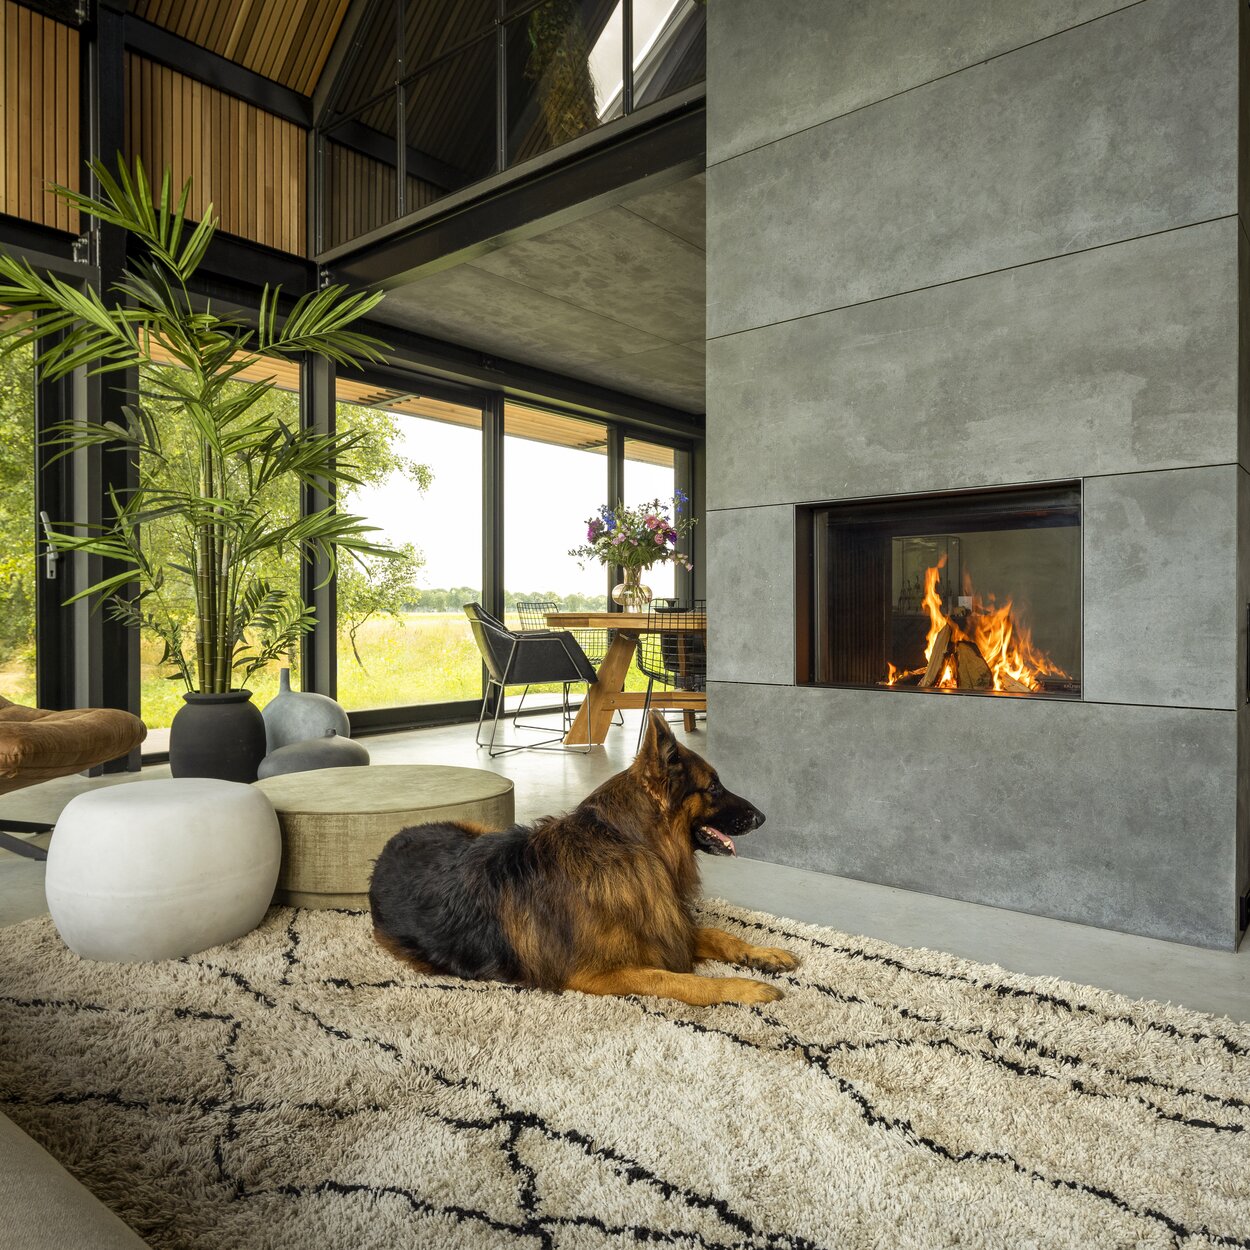 Wood fireplace W80/52T by Kalfire as a centrepiece in the living room with natural furnishings and dog in front of the tunnel fireplace